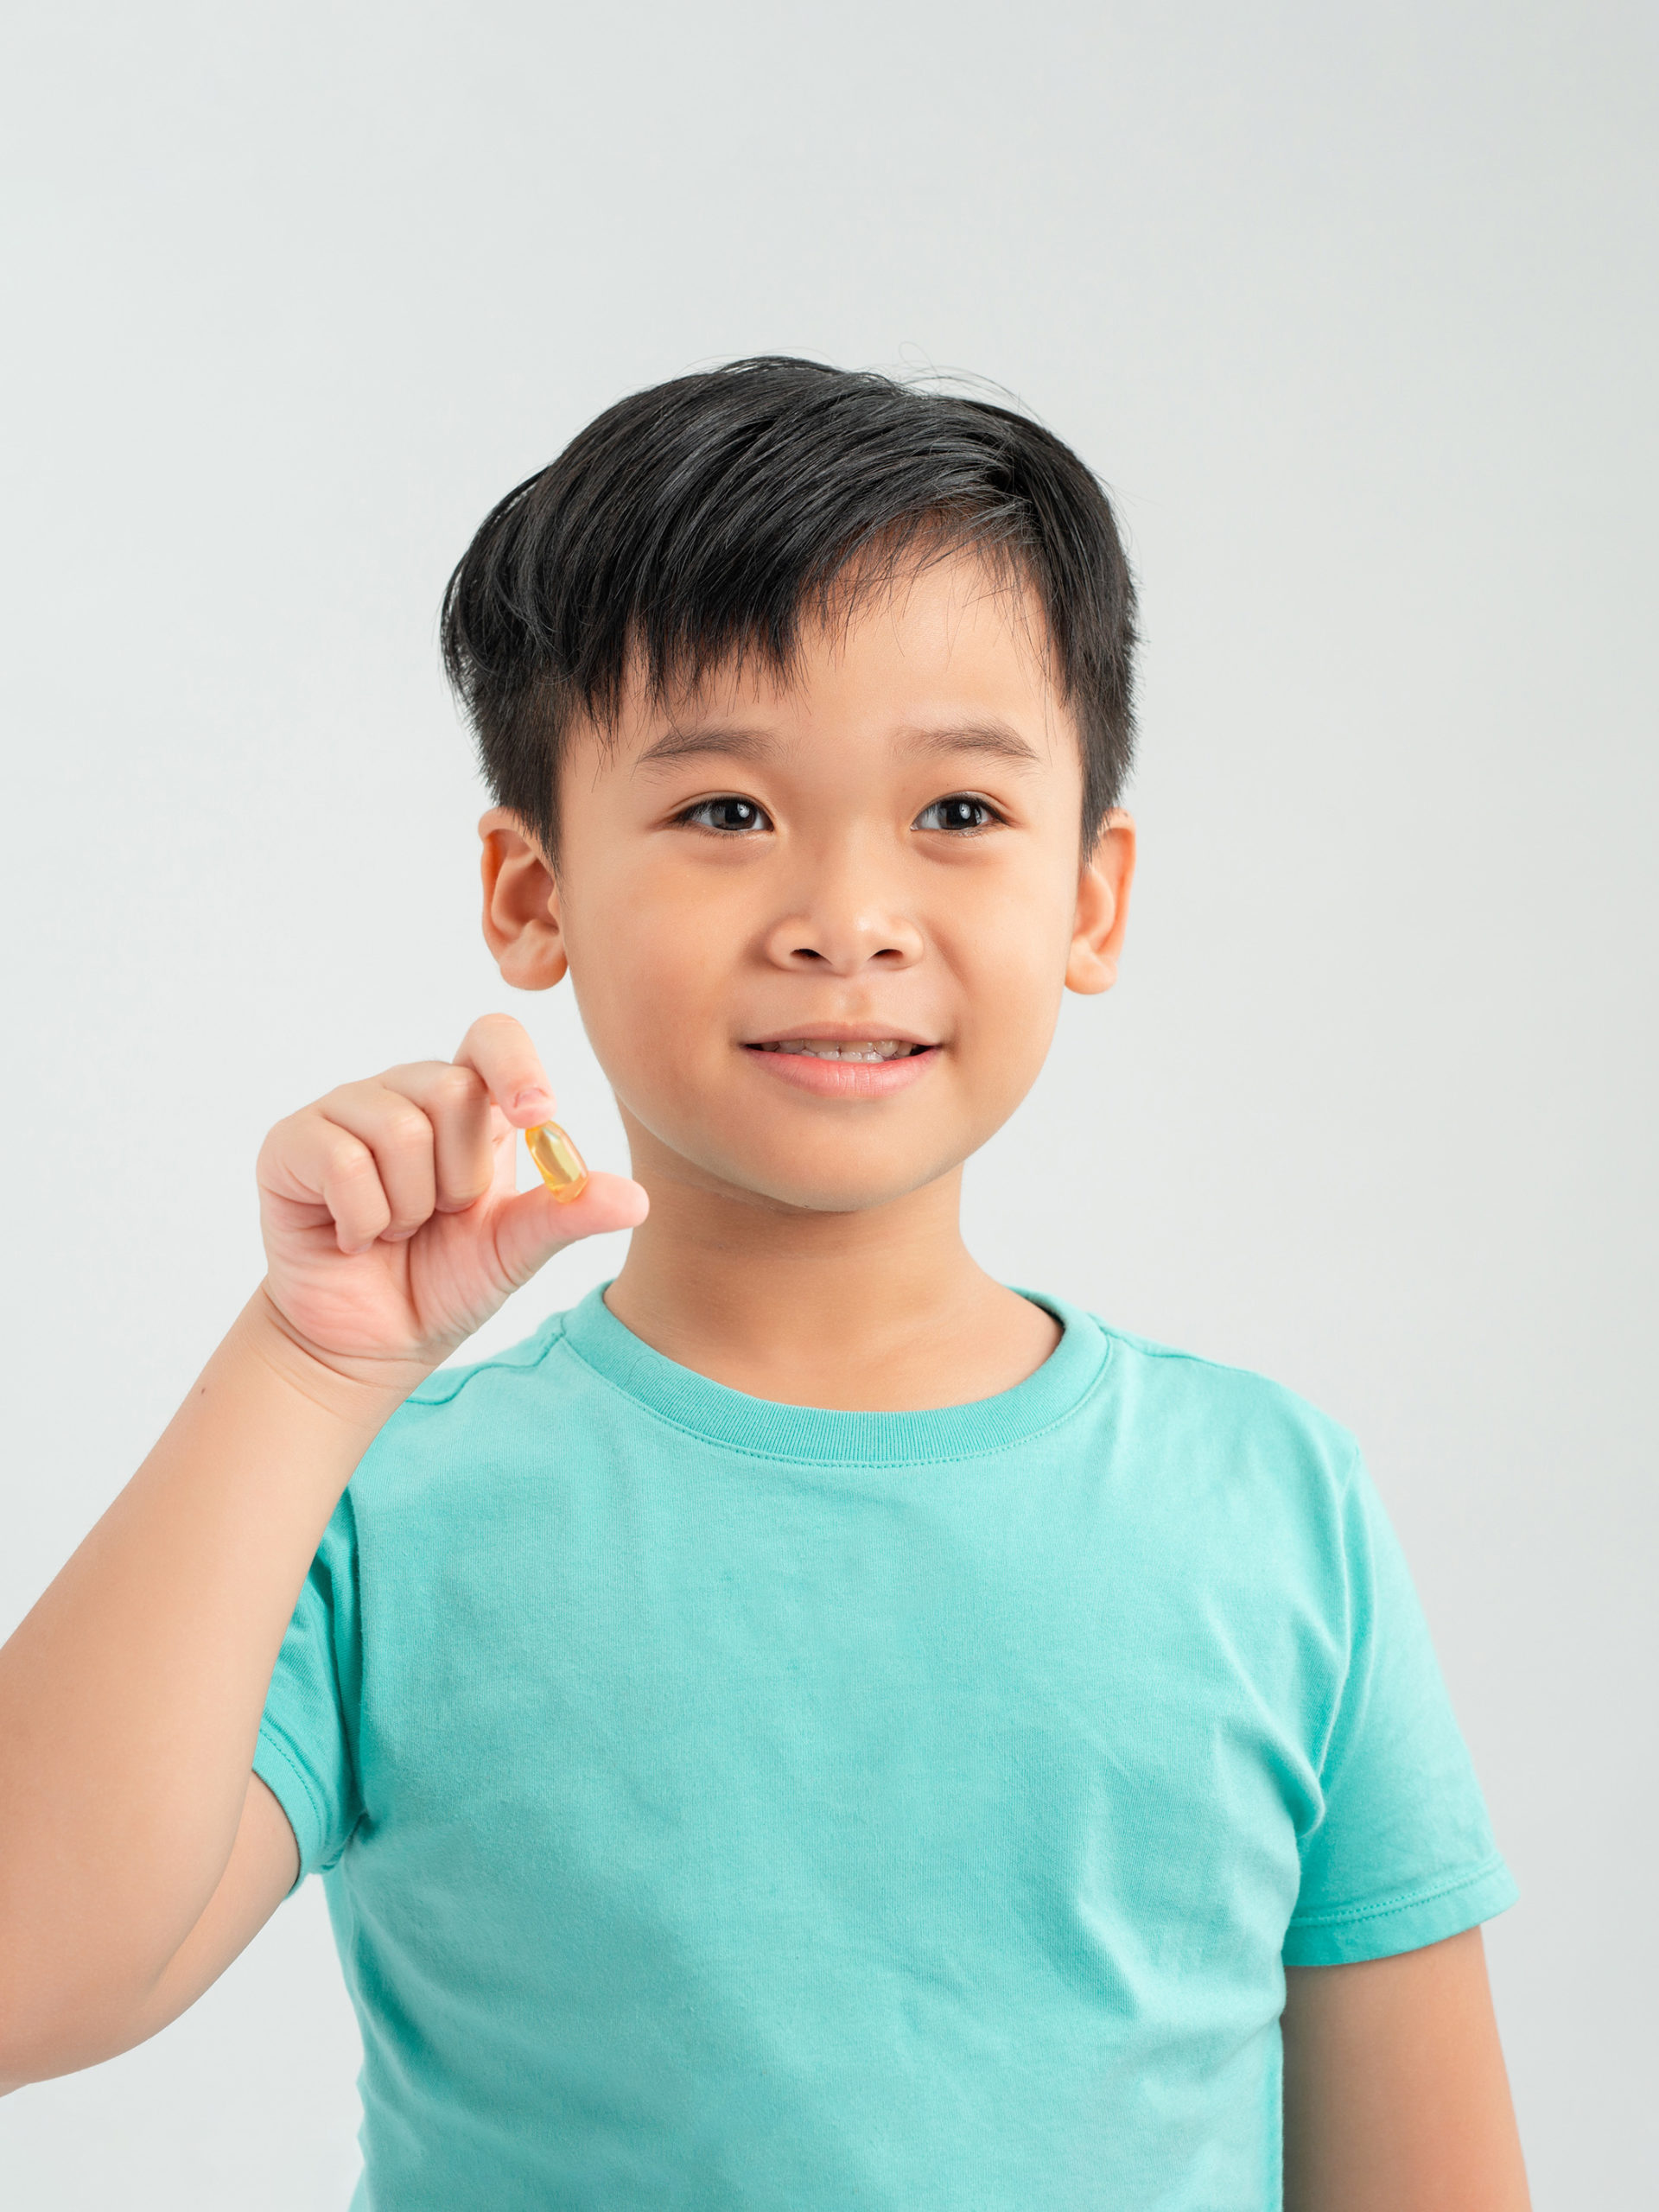 7 easy ways to help your child take medications